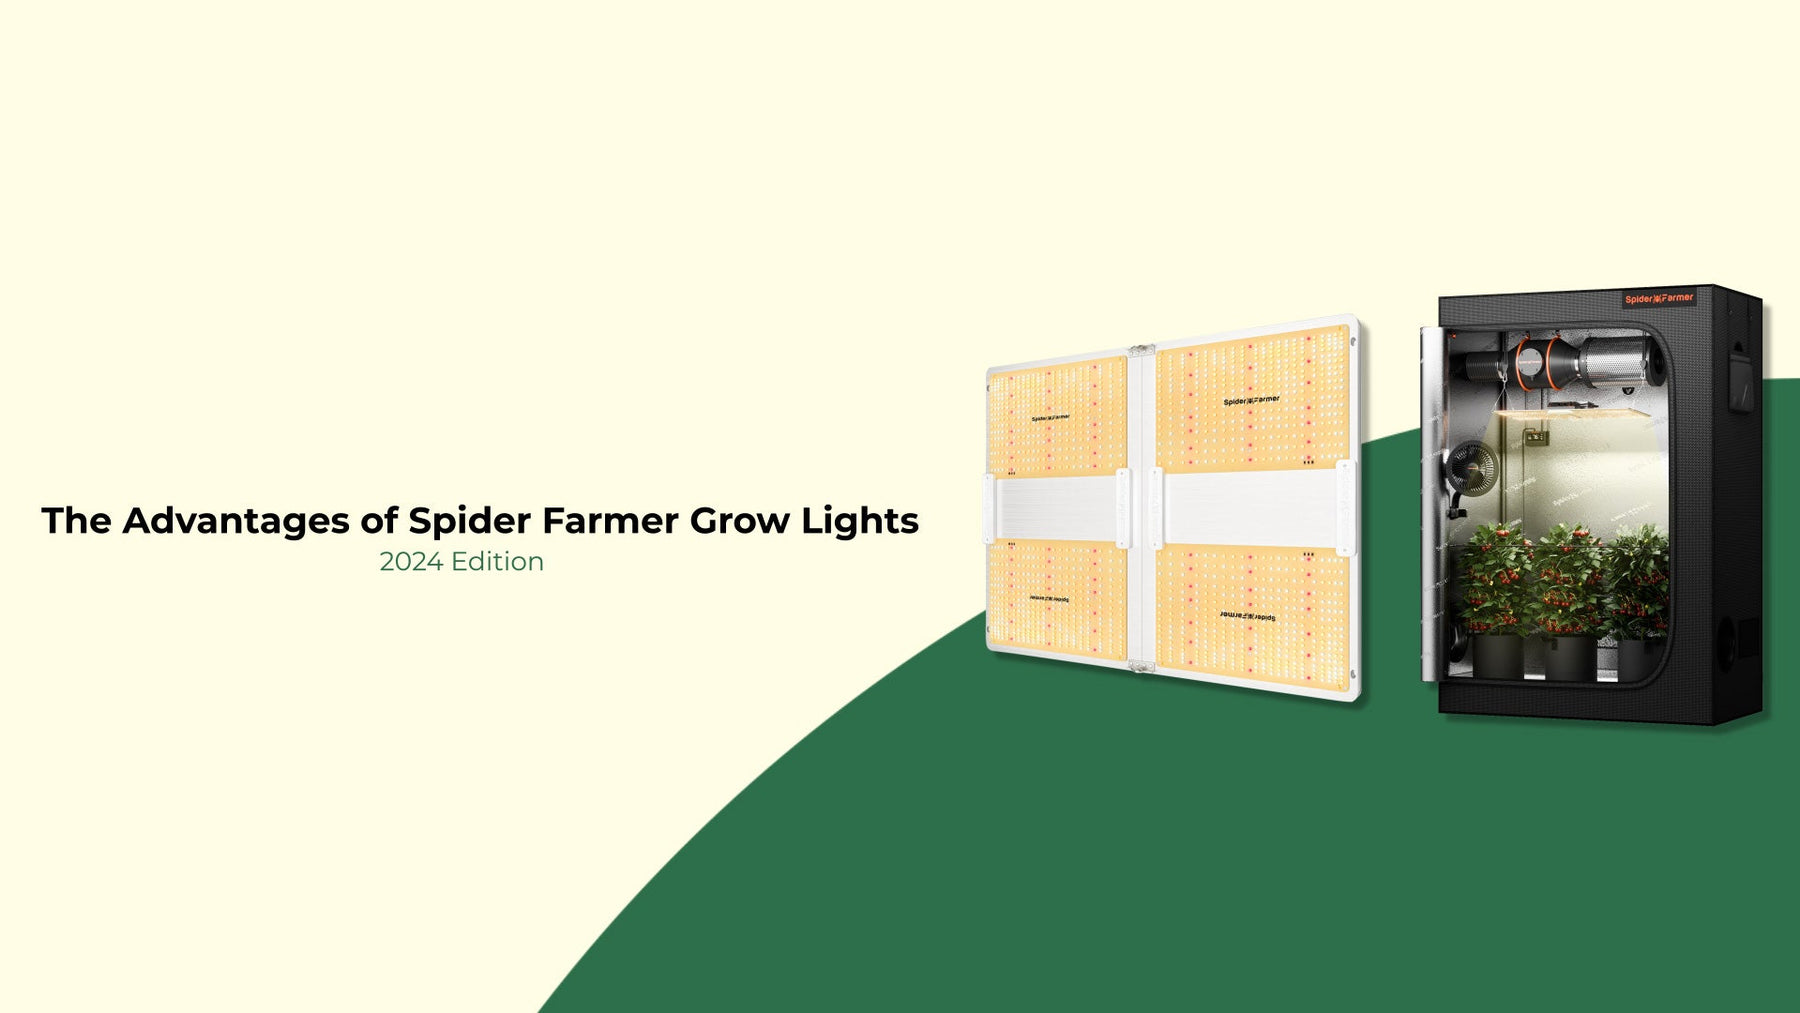 The Advantages of Using Spider Farmer LED Grow Lights